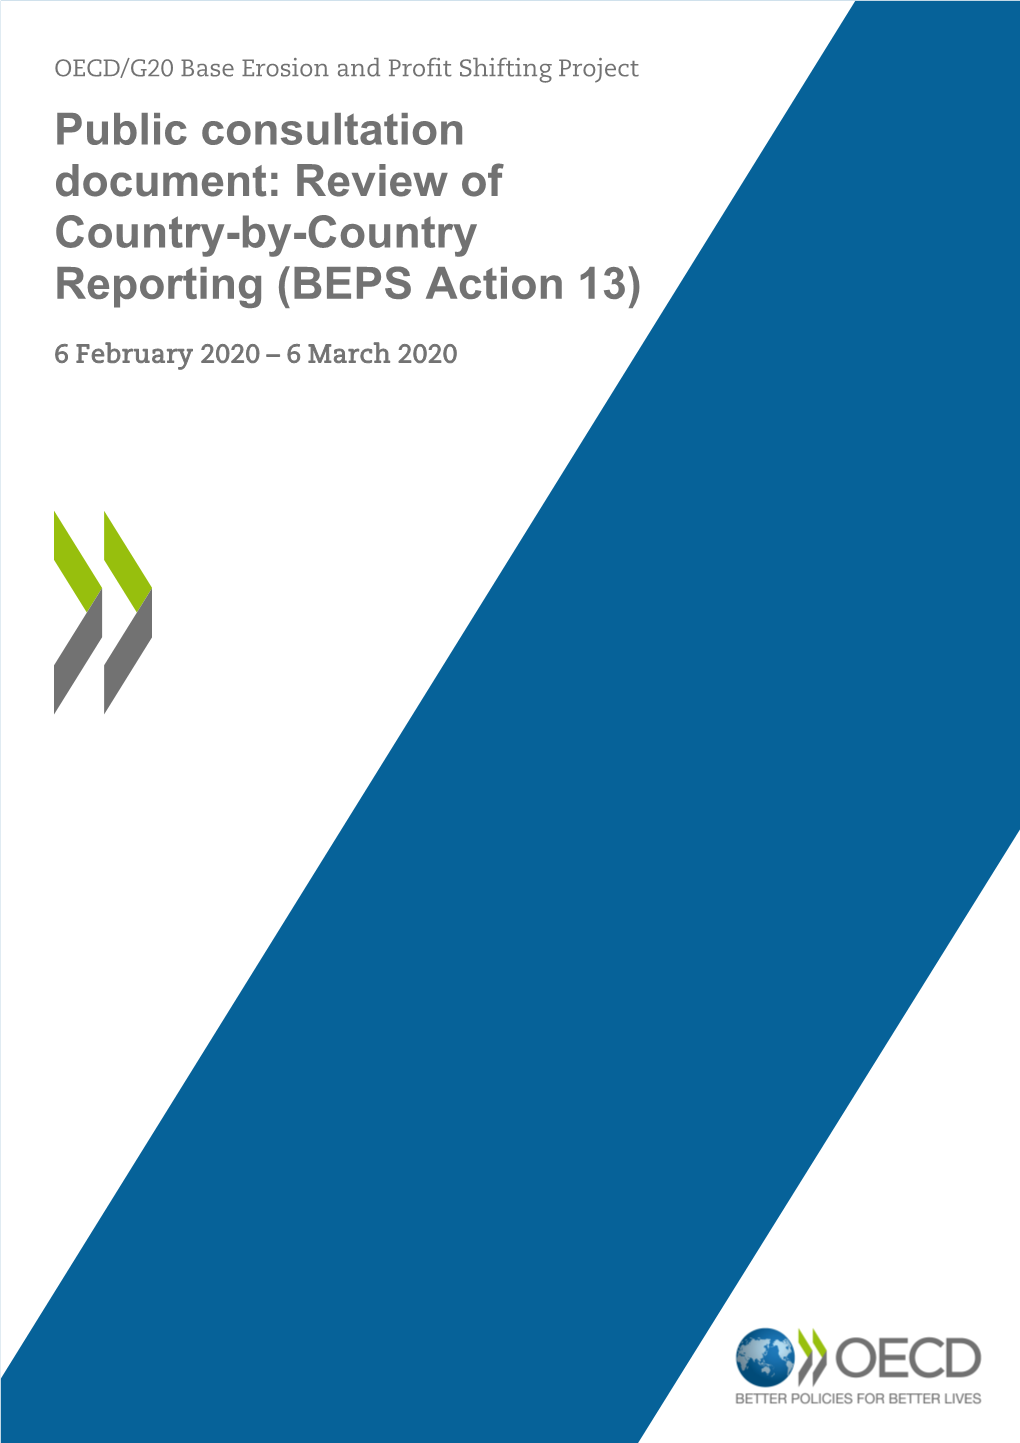 Public Consultation Document: Review of Country-By-Country Reporting (BEPS Action 13)